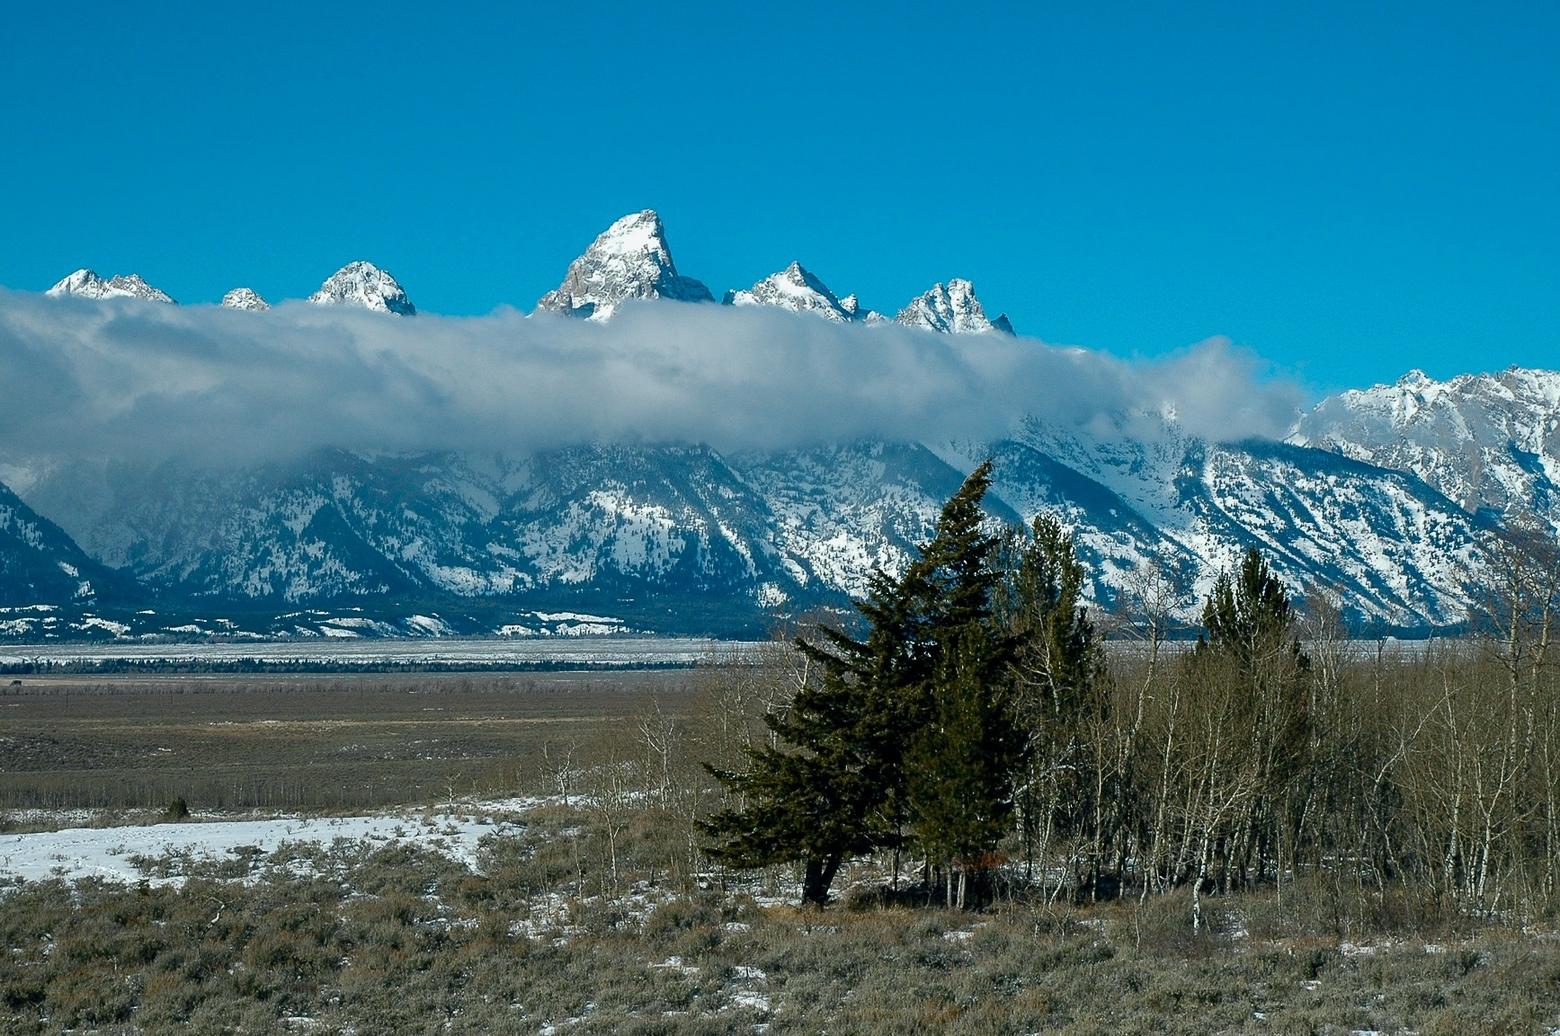 The wide-open places and wildlife near her home in Jackson bring Marsh peace. Here, she takes in the Tetons and a leaning Douglas-fir that she called “the dwelling tree” in a 2021 MoJo piece. She visited the dwelling tree on Christmas Eve this year. Photo by Susan Marsh